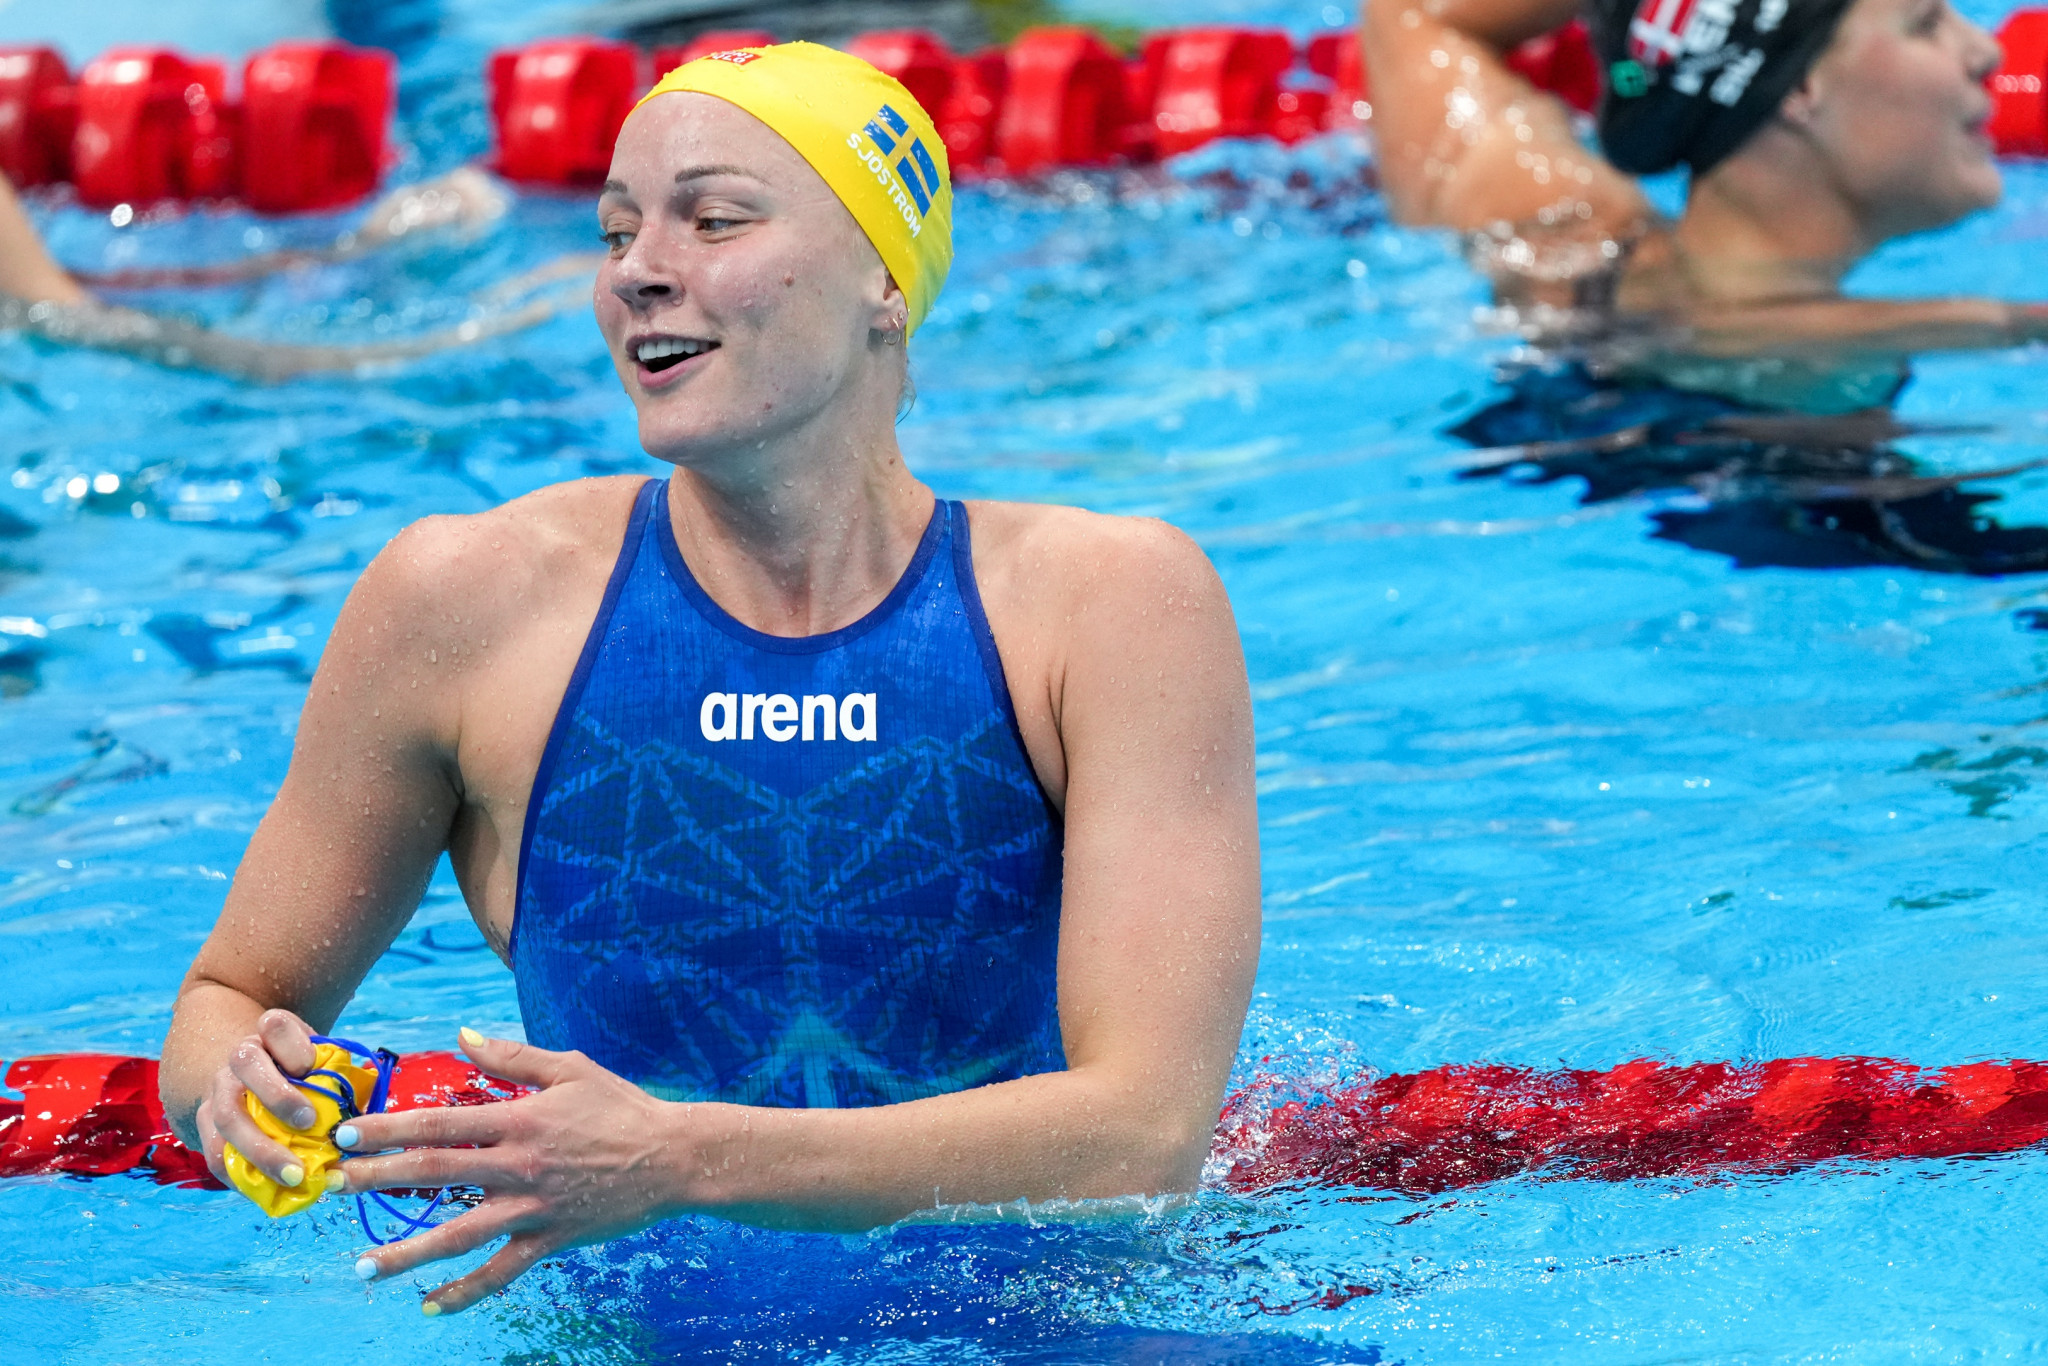 Sarah Sjöström has won three gold medals at the European Short Course Swimming Championships ©Getty Images